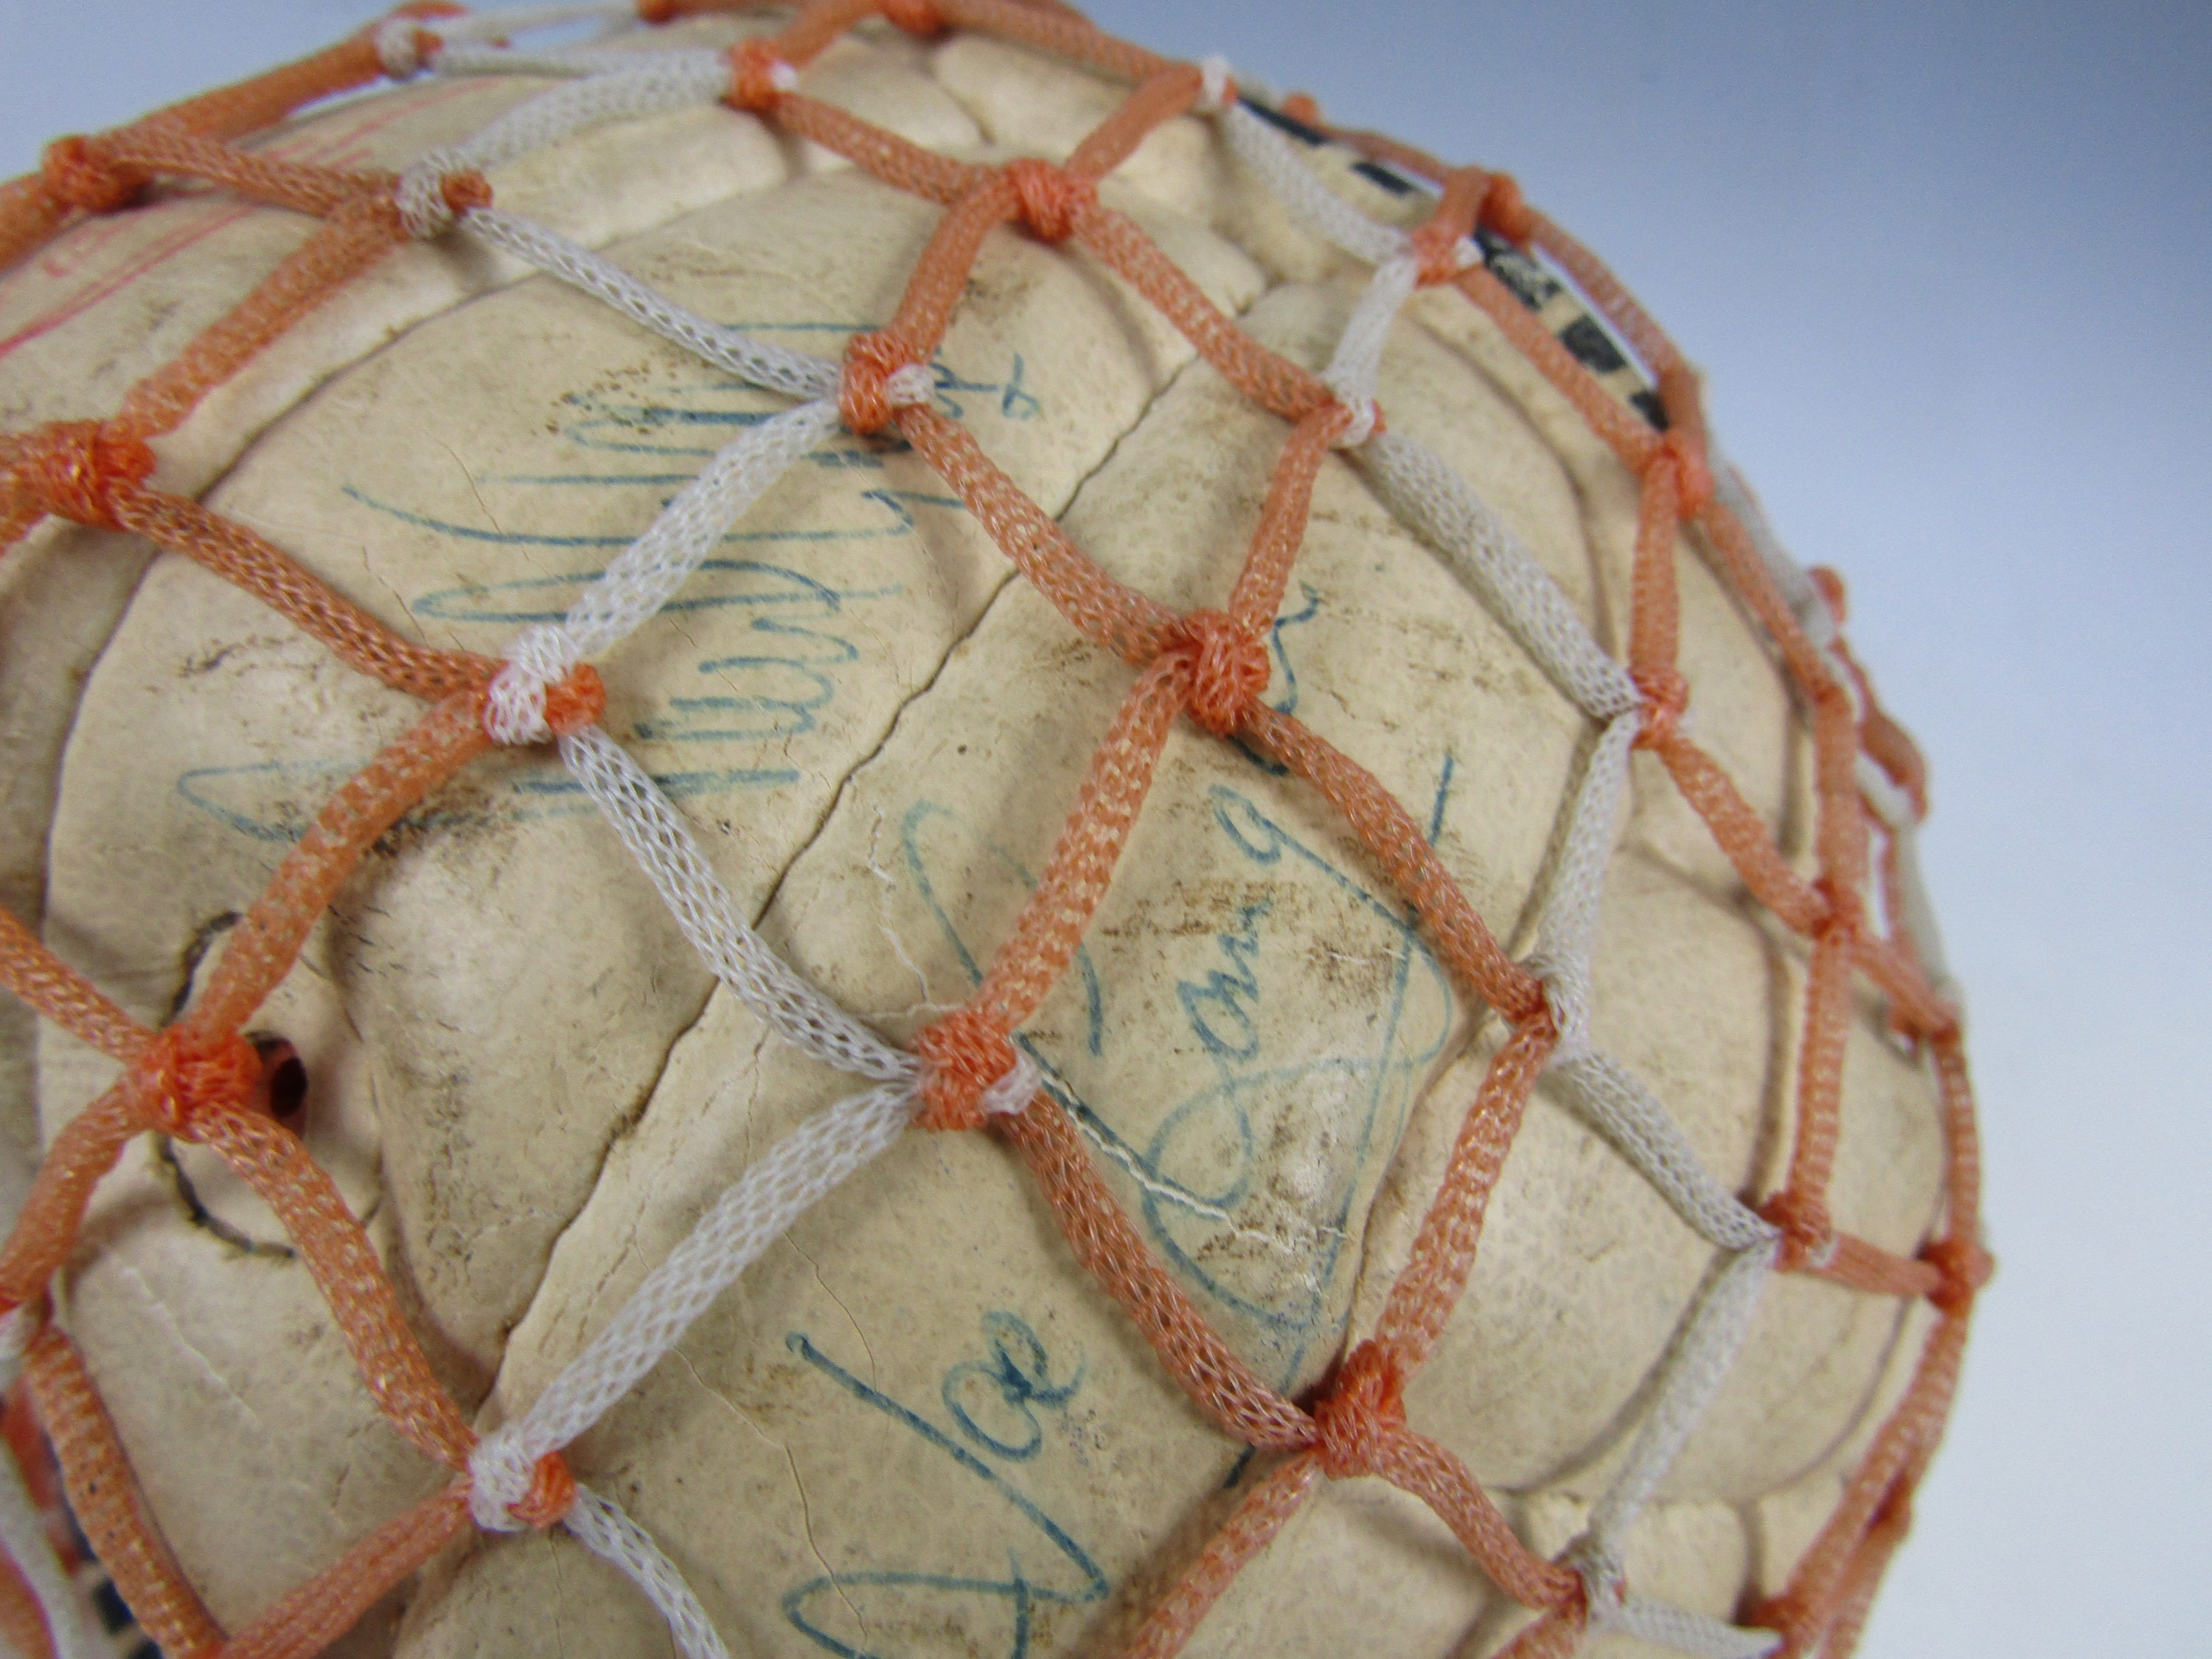 [Autographs] A white Minerva Super leather football signed by the England national football squad, - Image 3 of 3